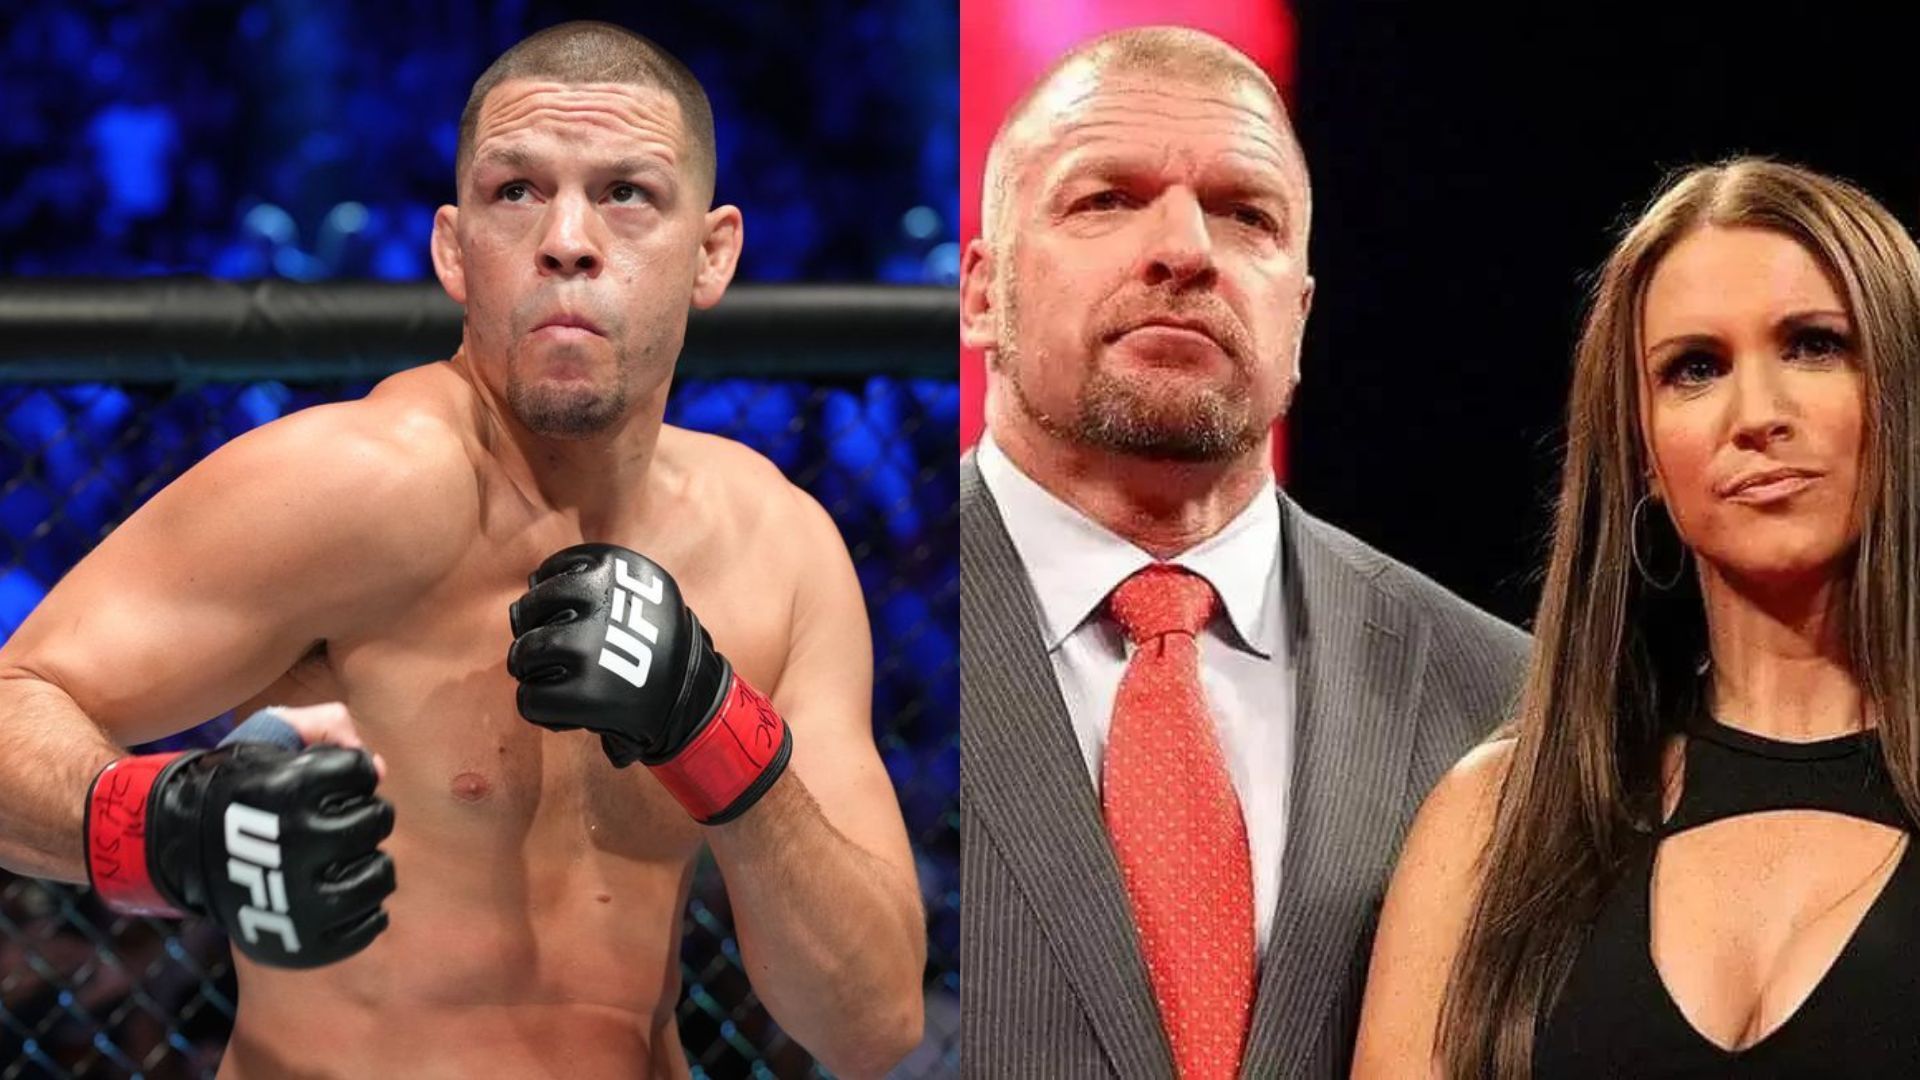 Nate Diaz was recently spotted with the two WWE personalities